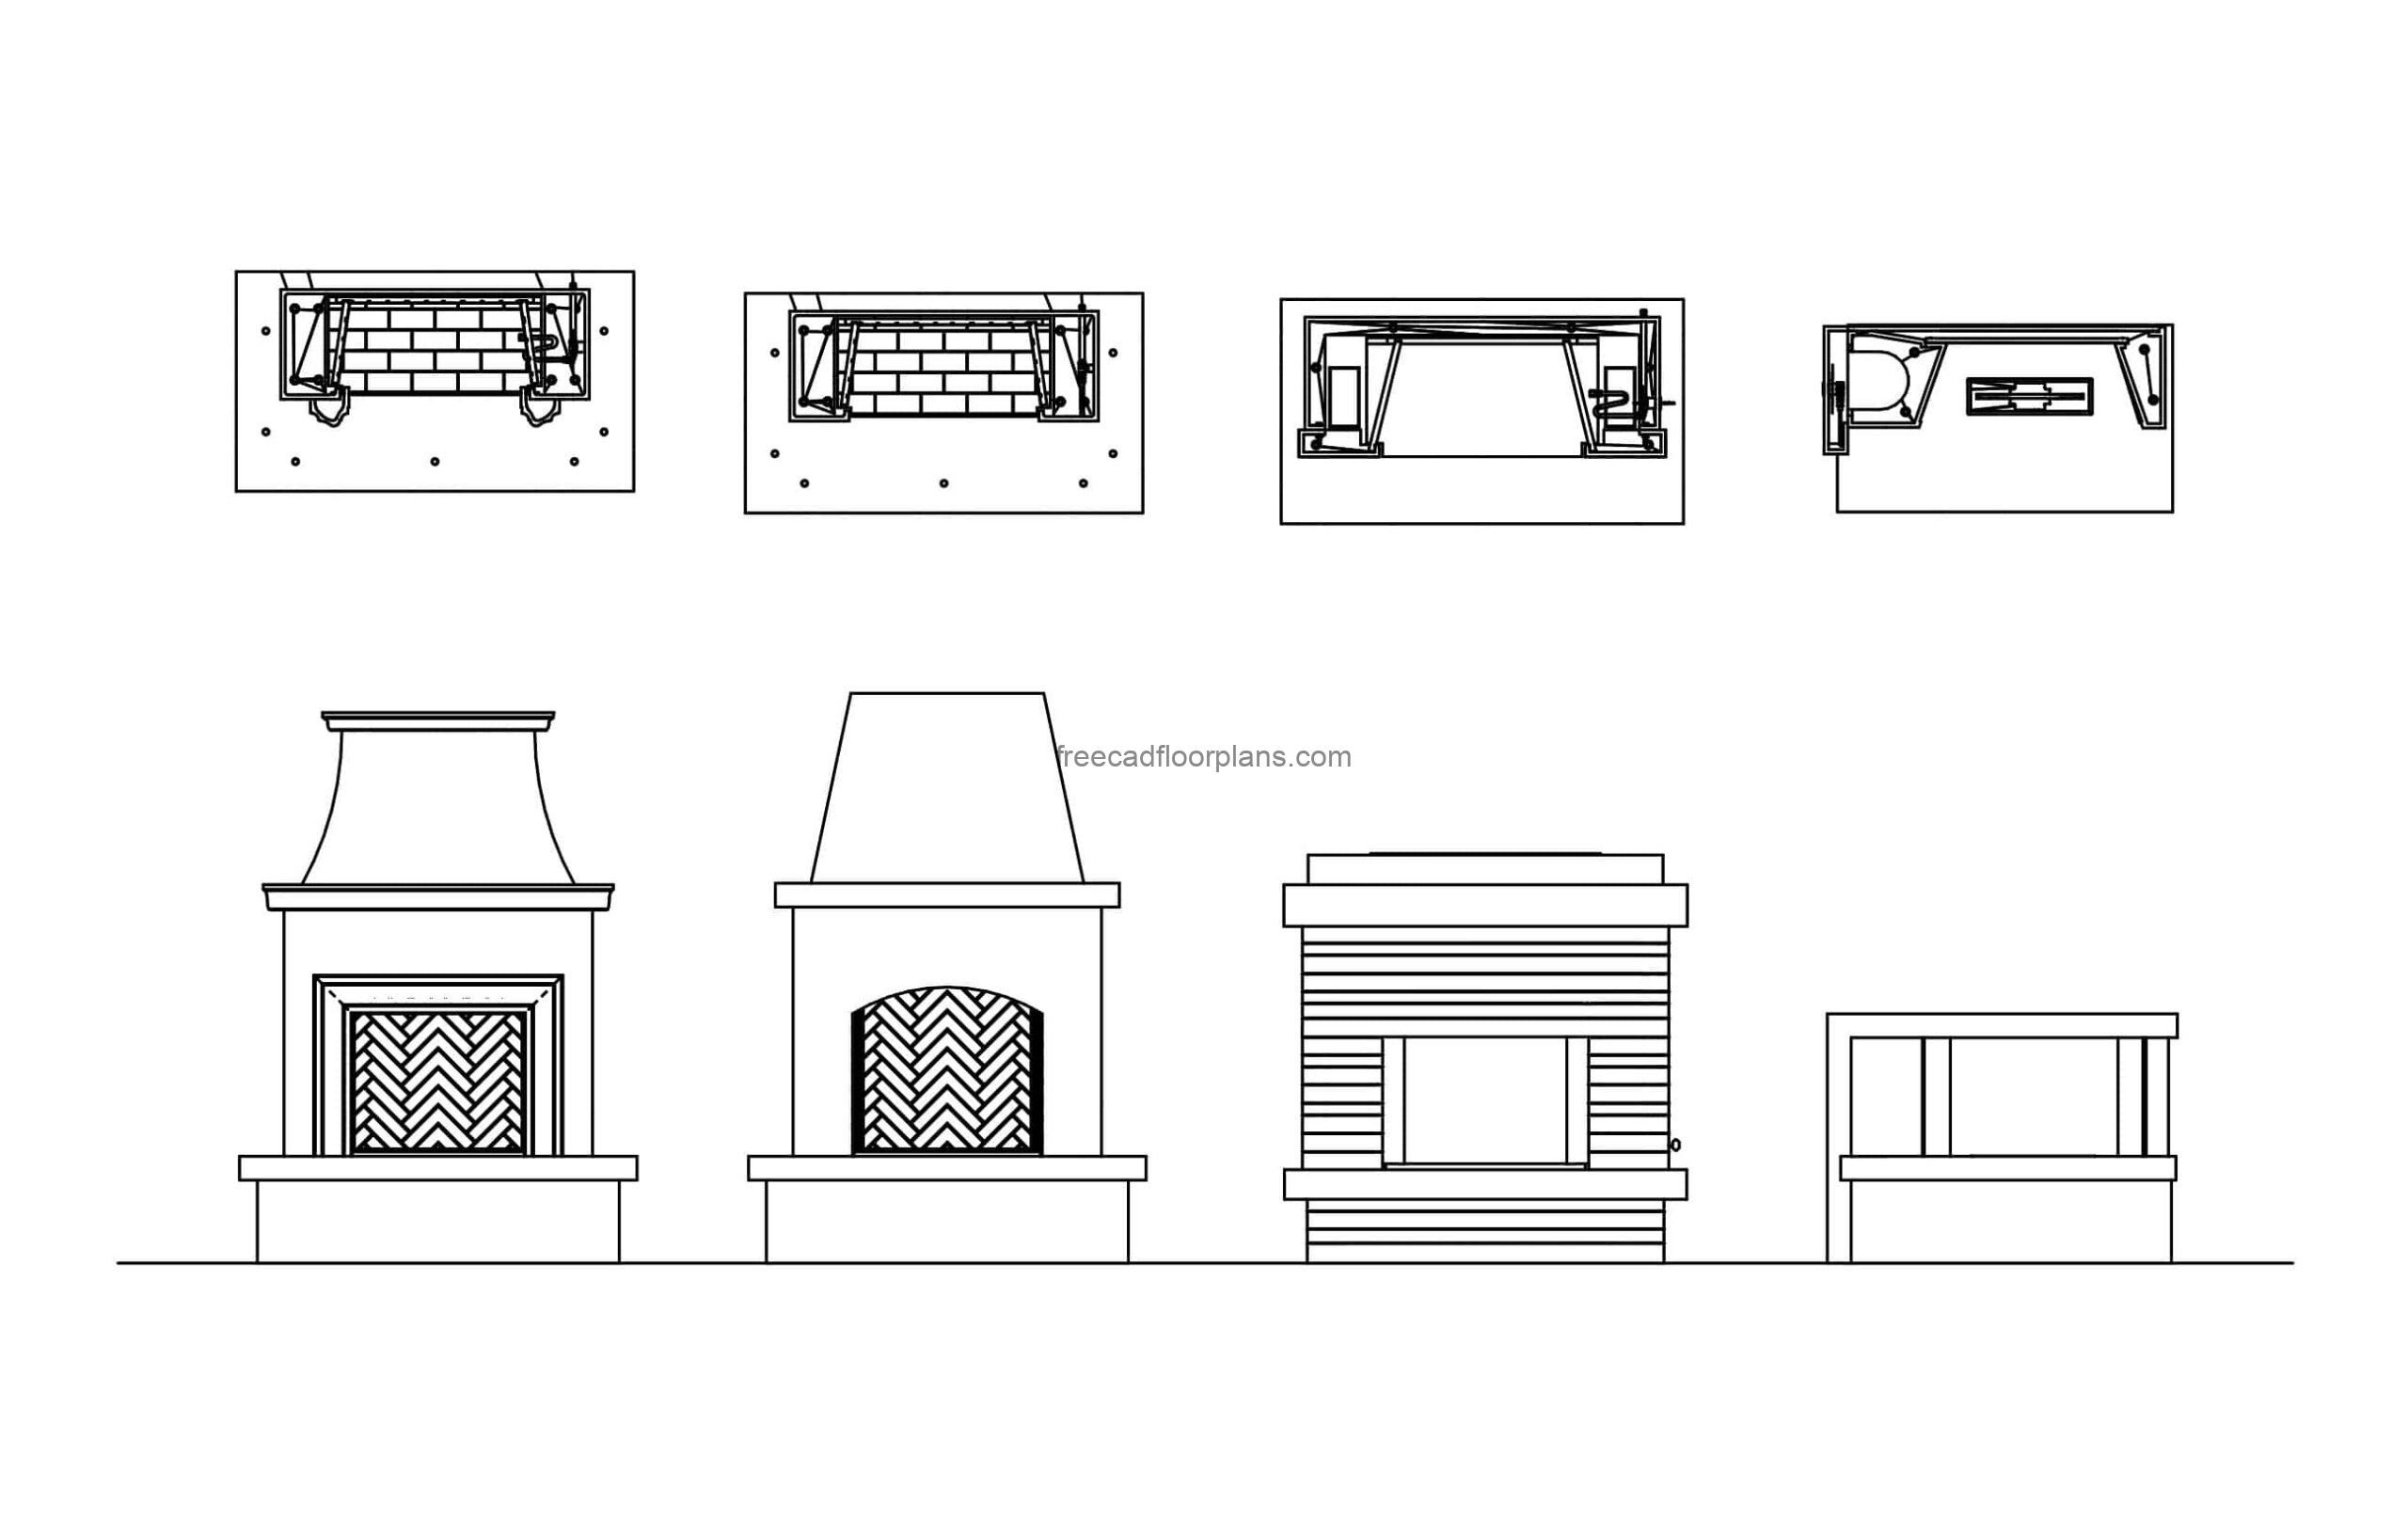 4 fireplaces design cad block drawing, plan and elevations views, dwg file for free download